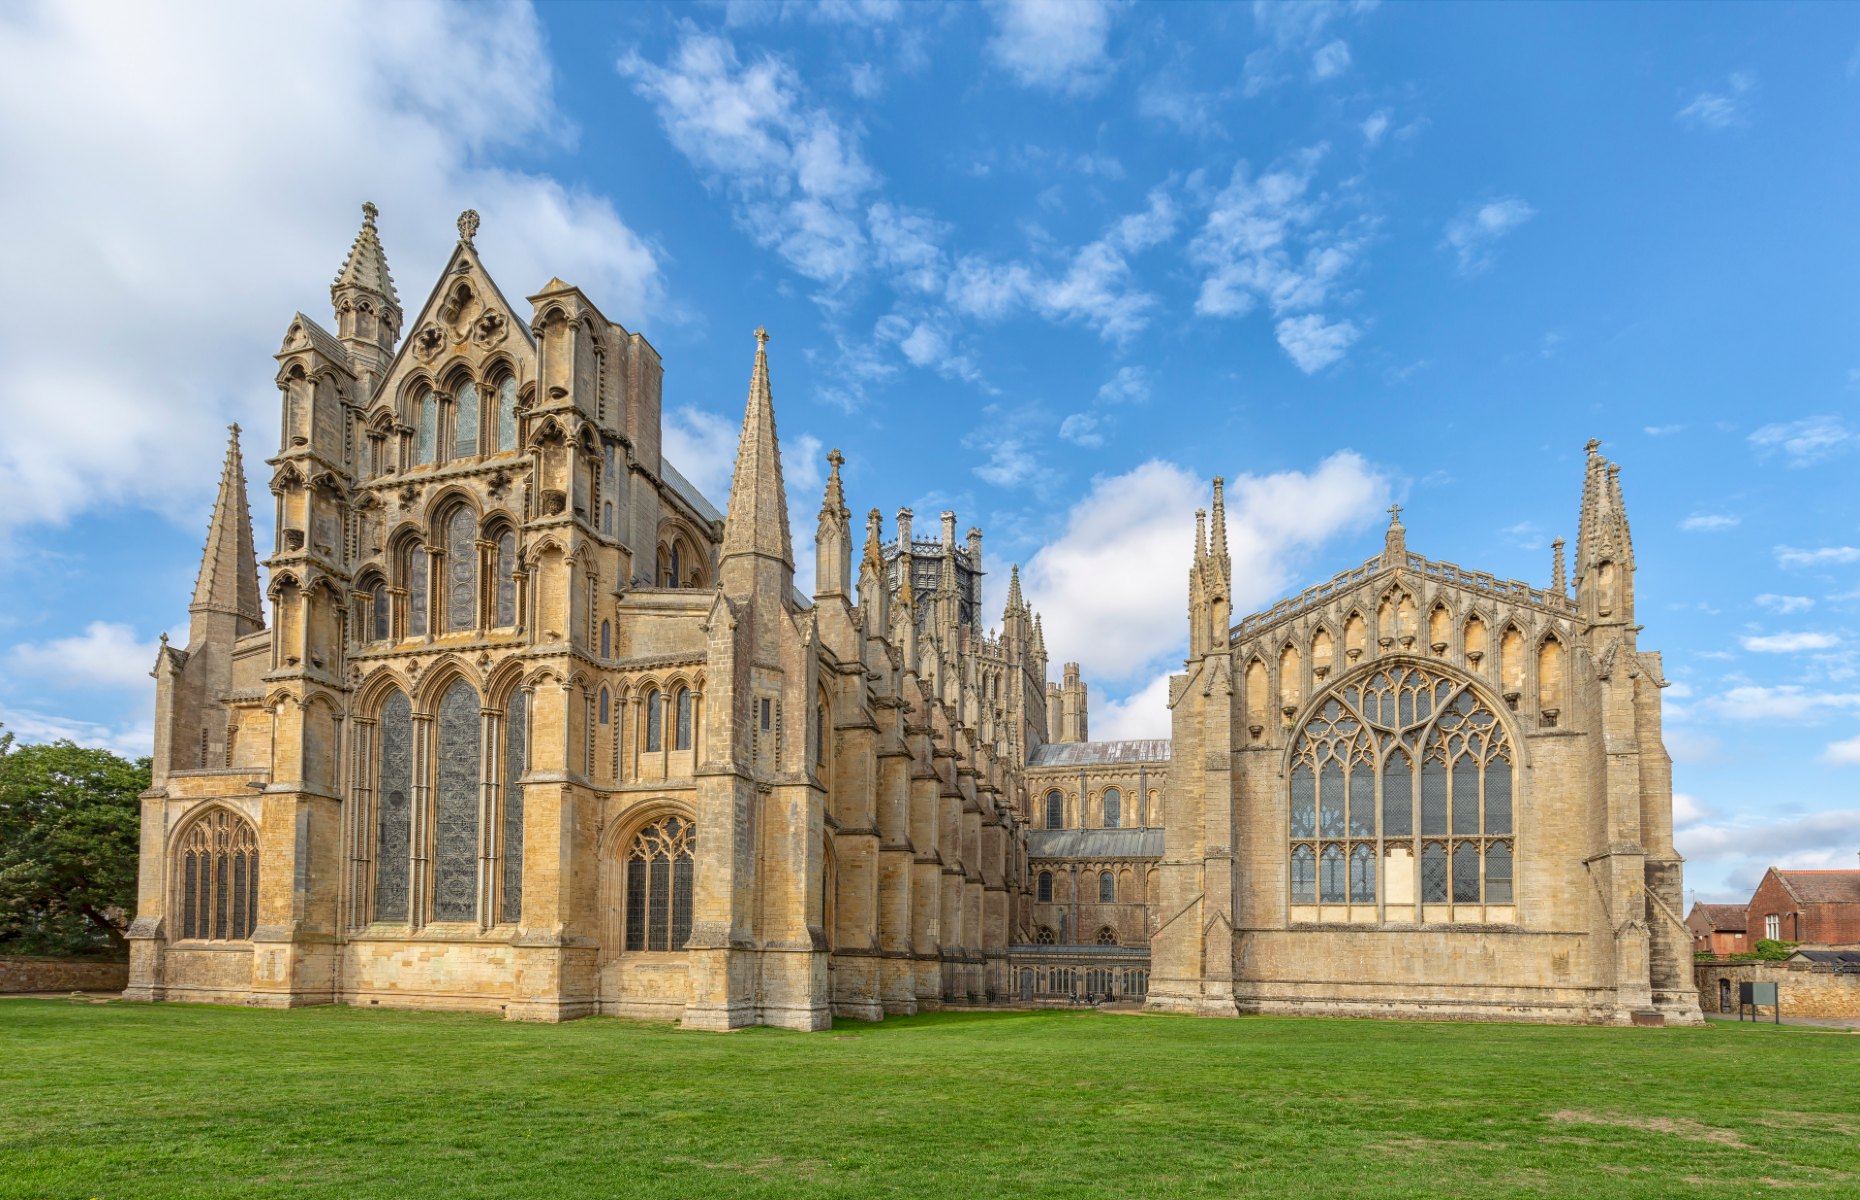 The exterior of Ely Cathedral (Image: Mark Godden/Shutterstock)